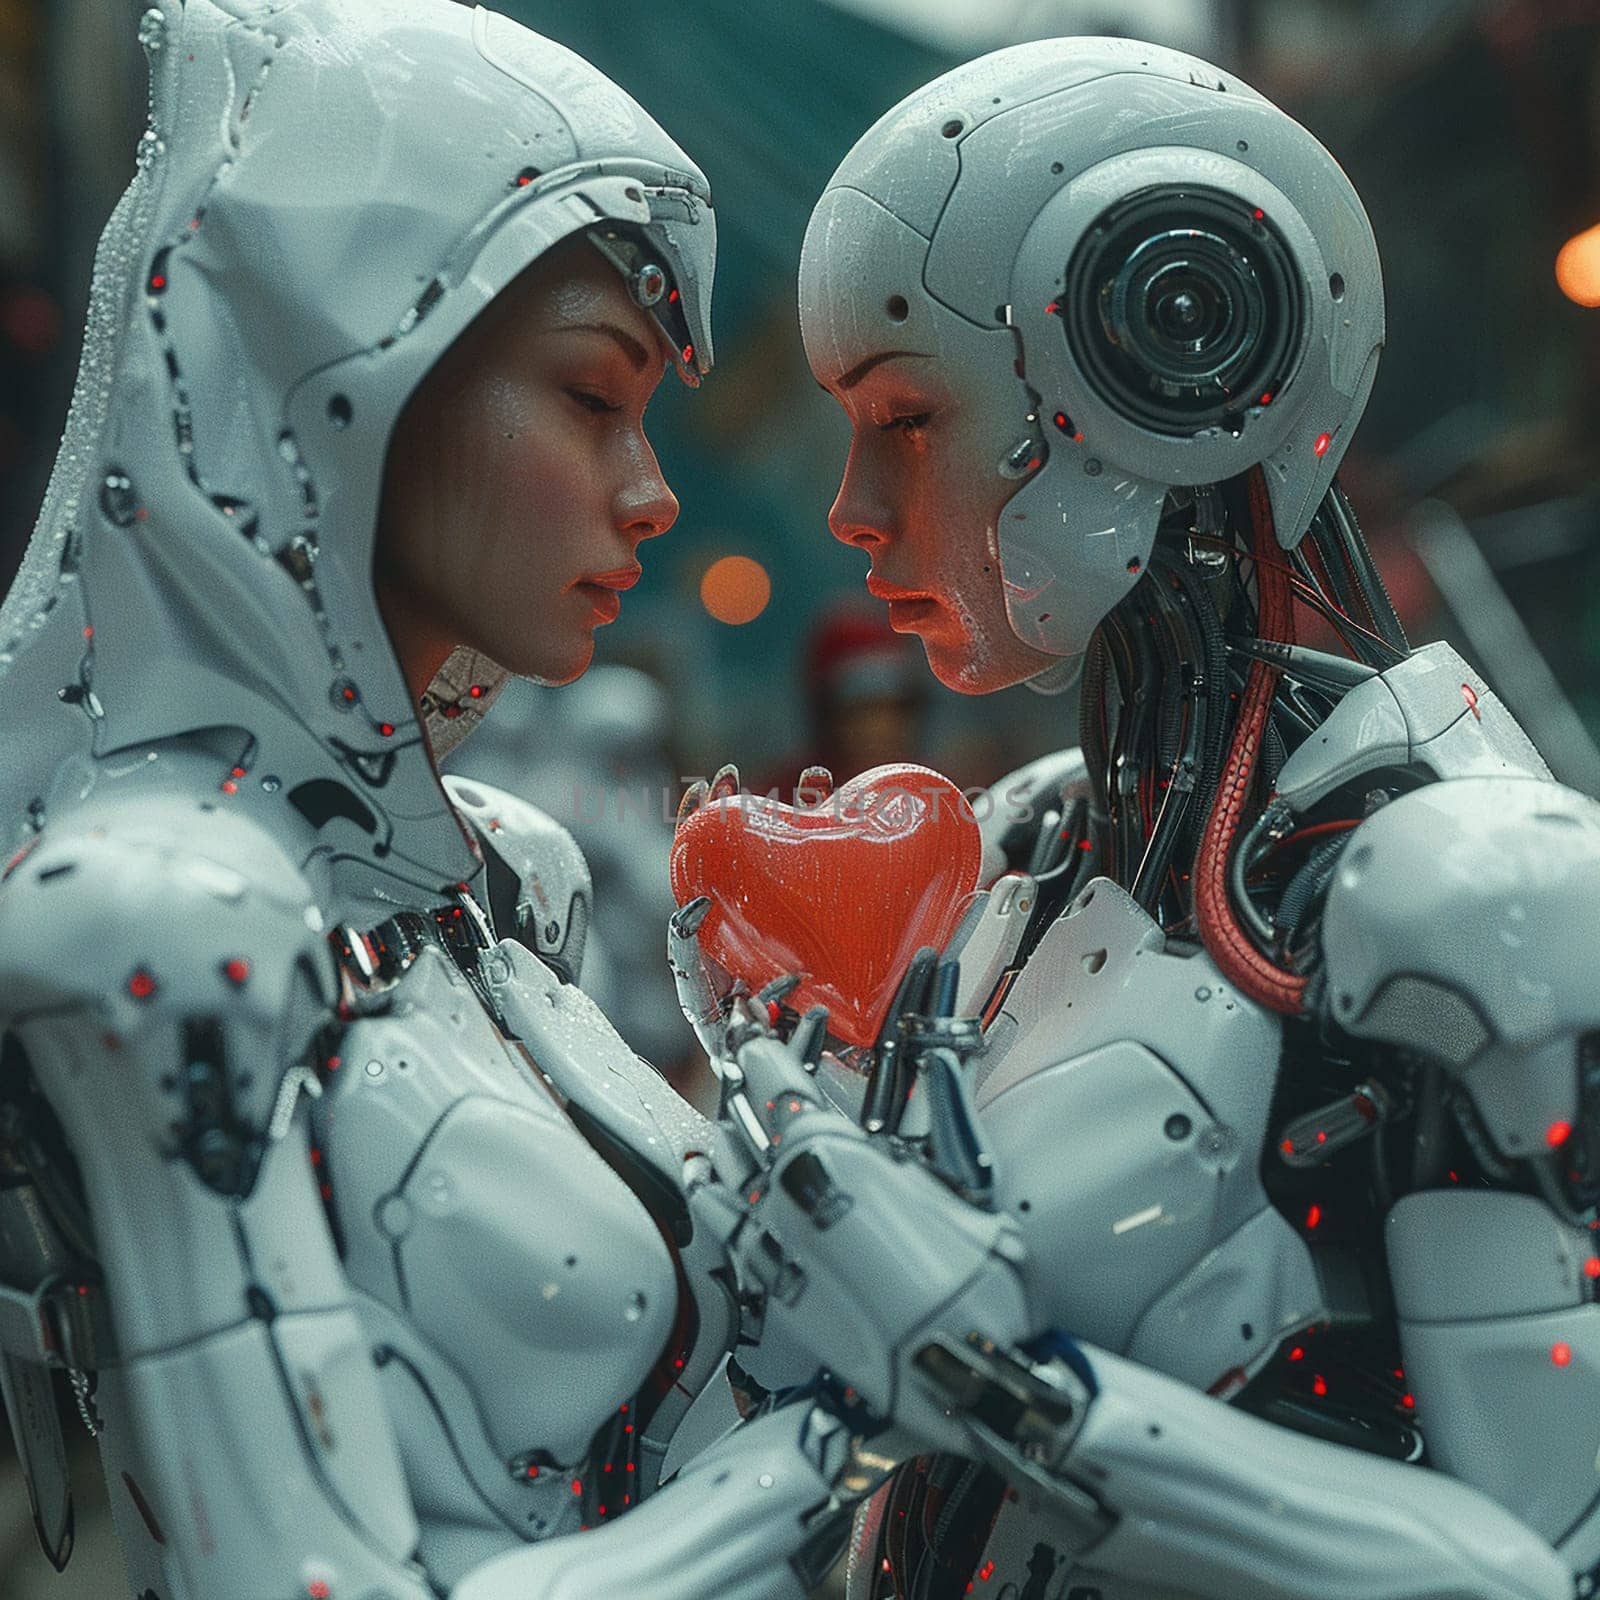 Sci-fi interpretation of White Day celebration with androids exchanging heart-shaped metallic tokens. by Benzoix